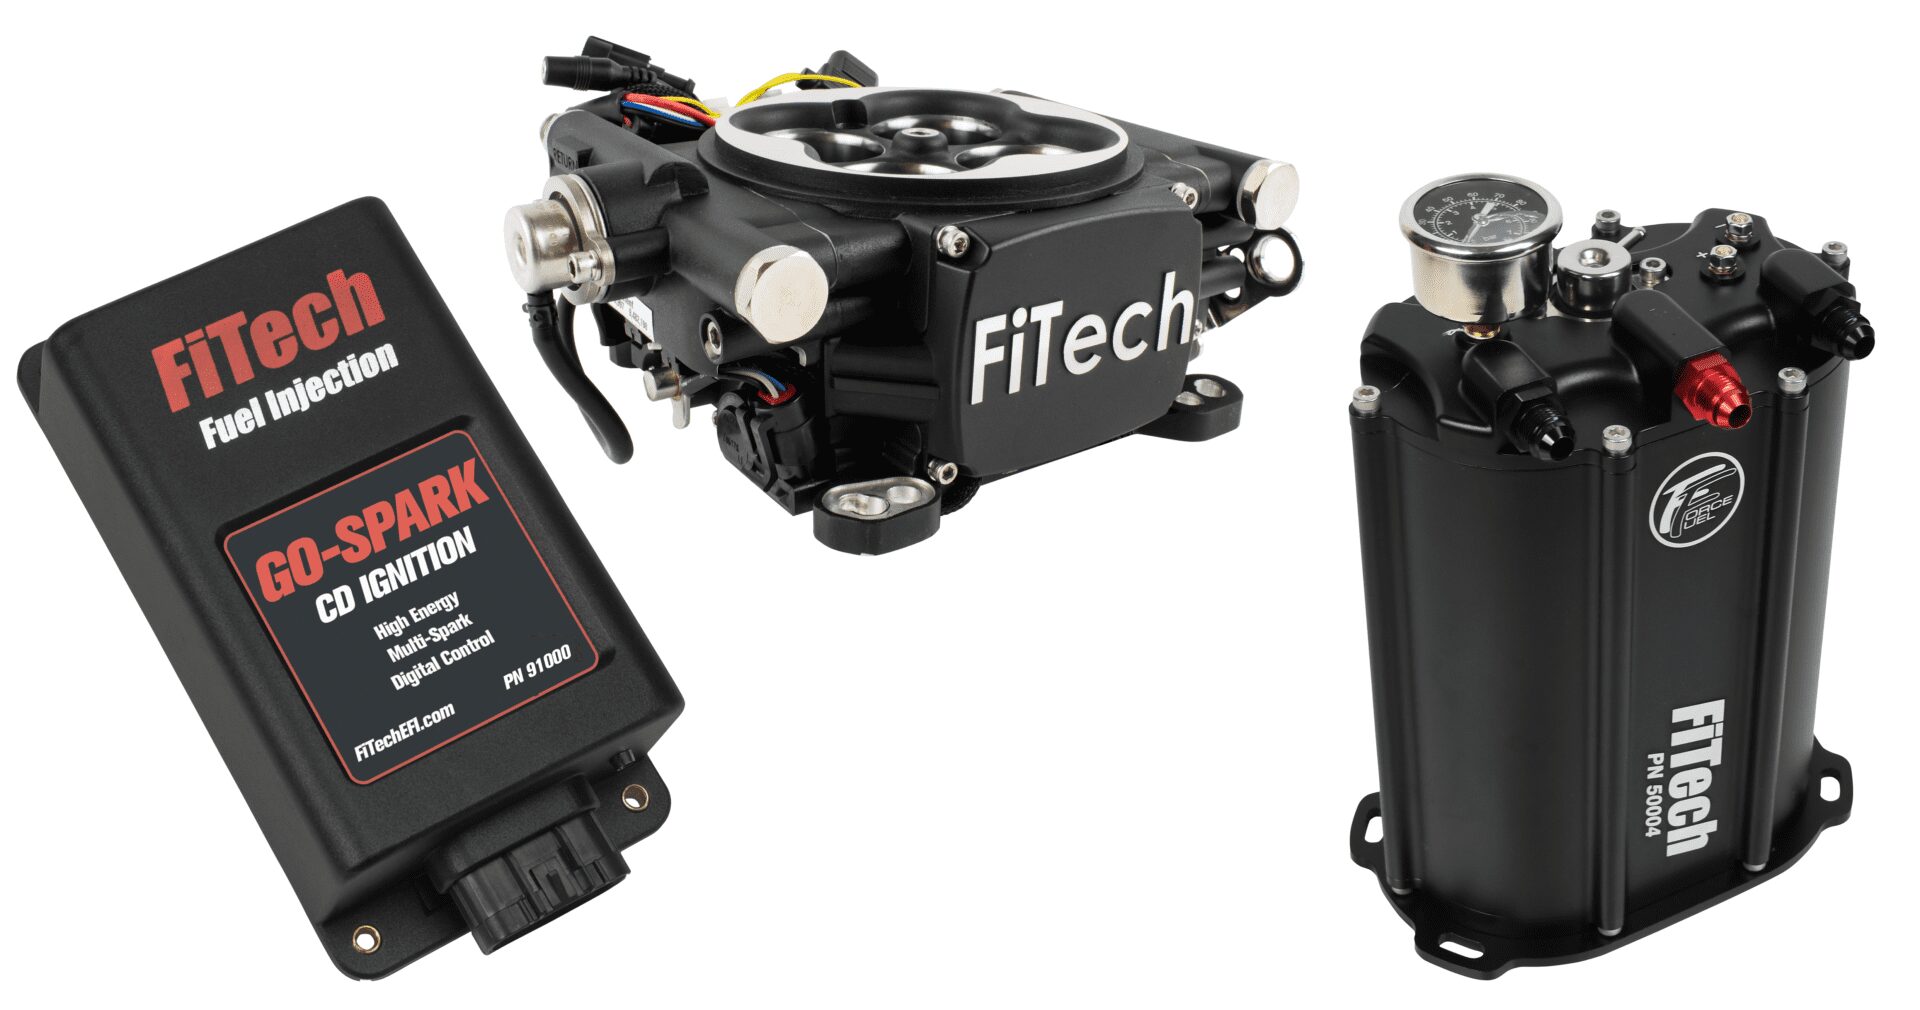 FiTech 93502 Go EFI 4 System (Black Finish) Master Kit w/ Force Fuel, Fuel Delivery System